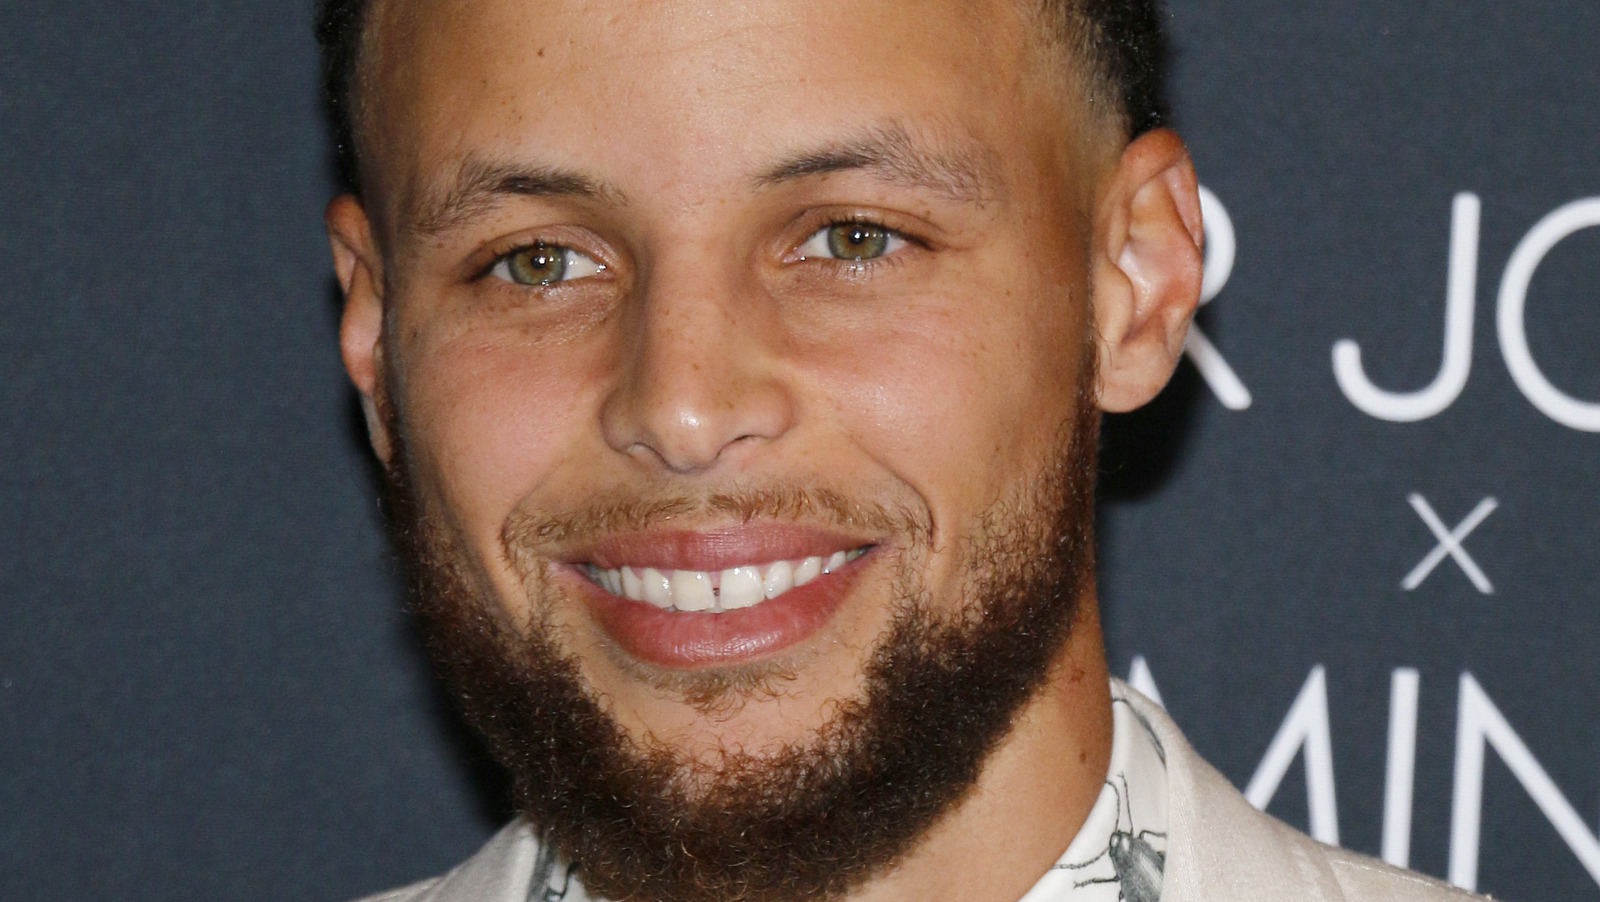 What We Know About Steph Curry's Parents Filing For Divorce